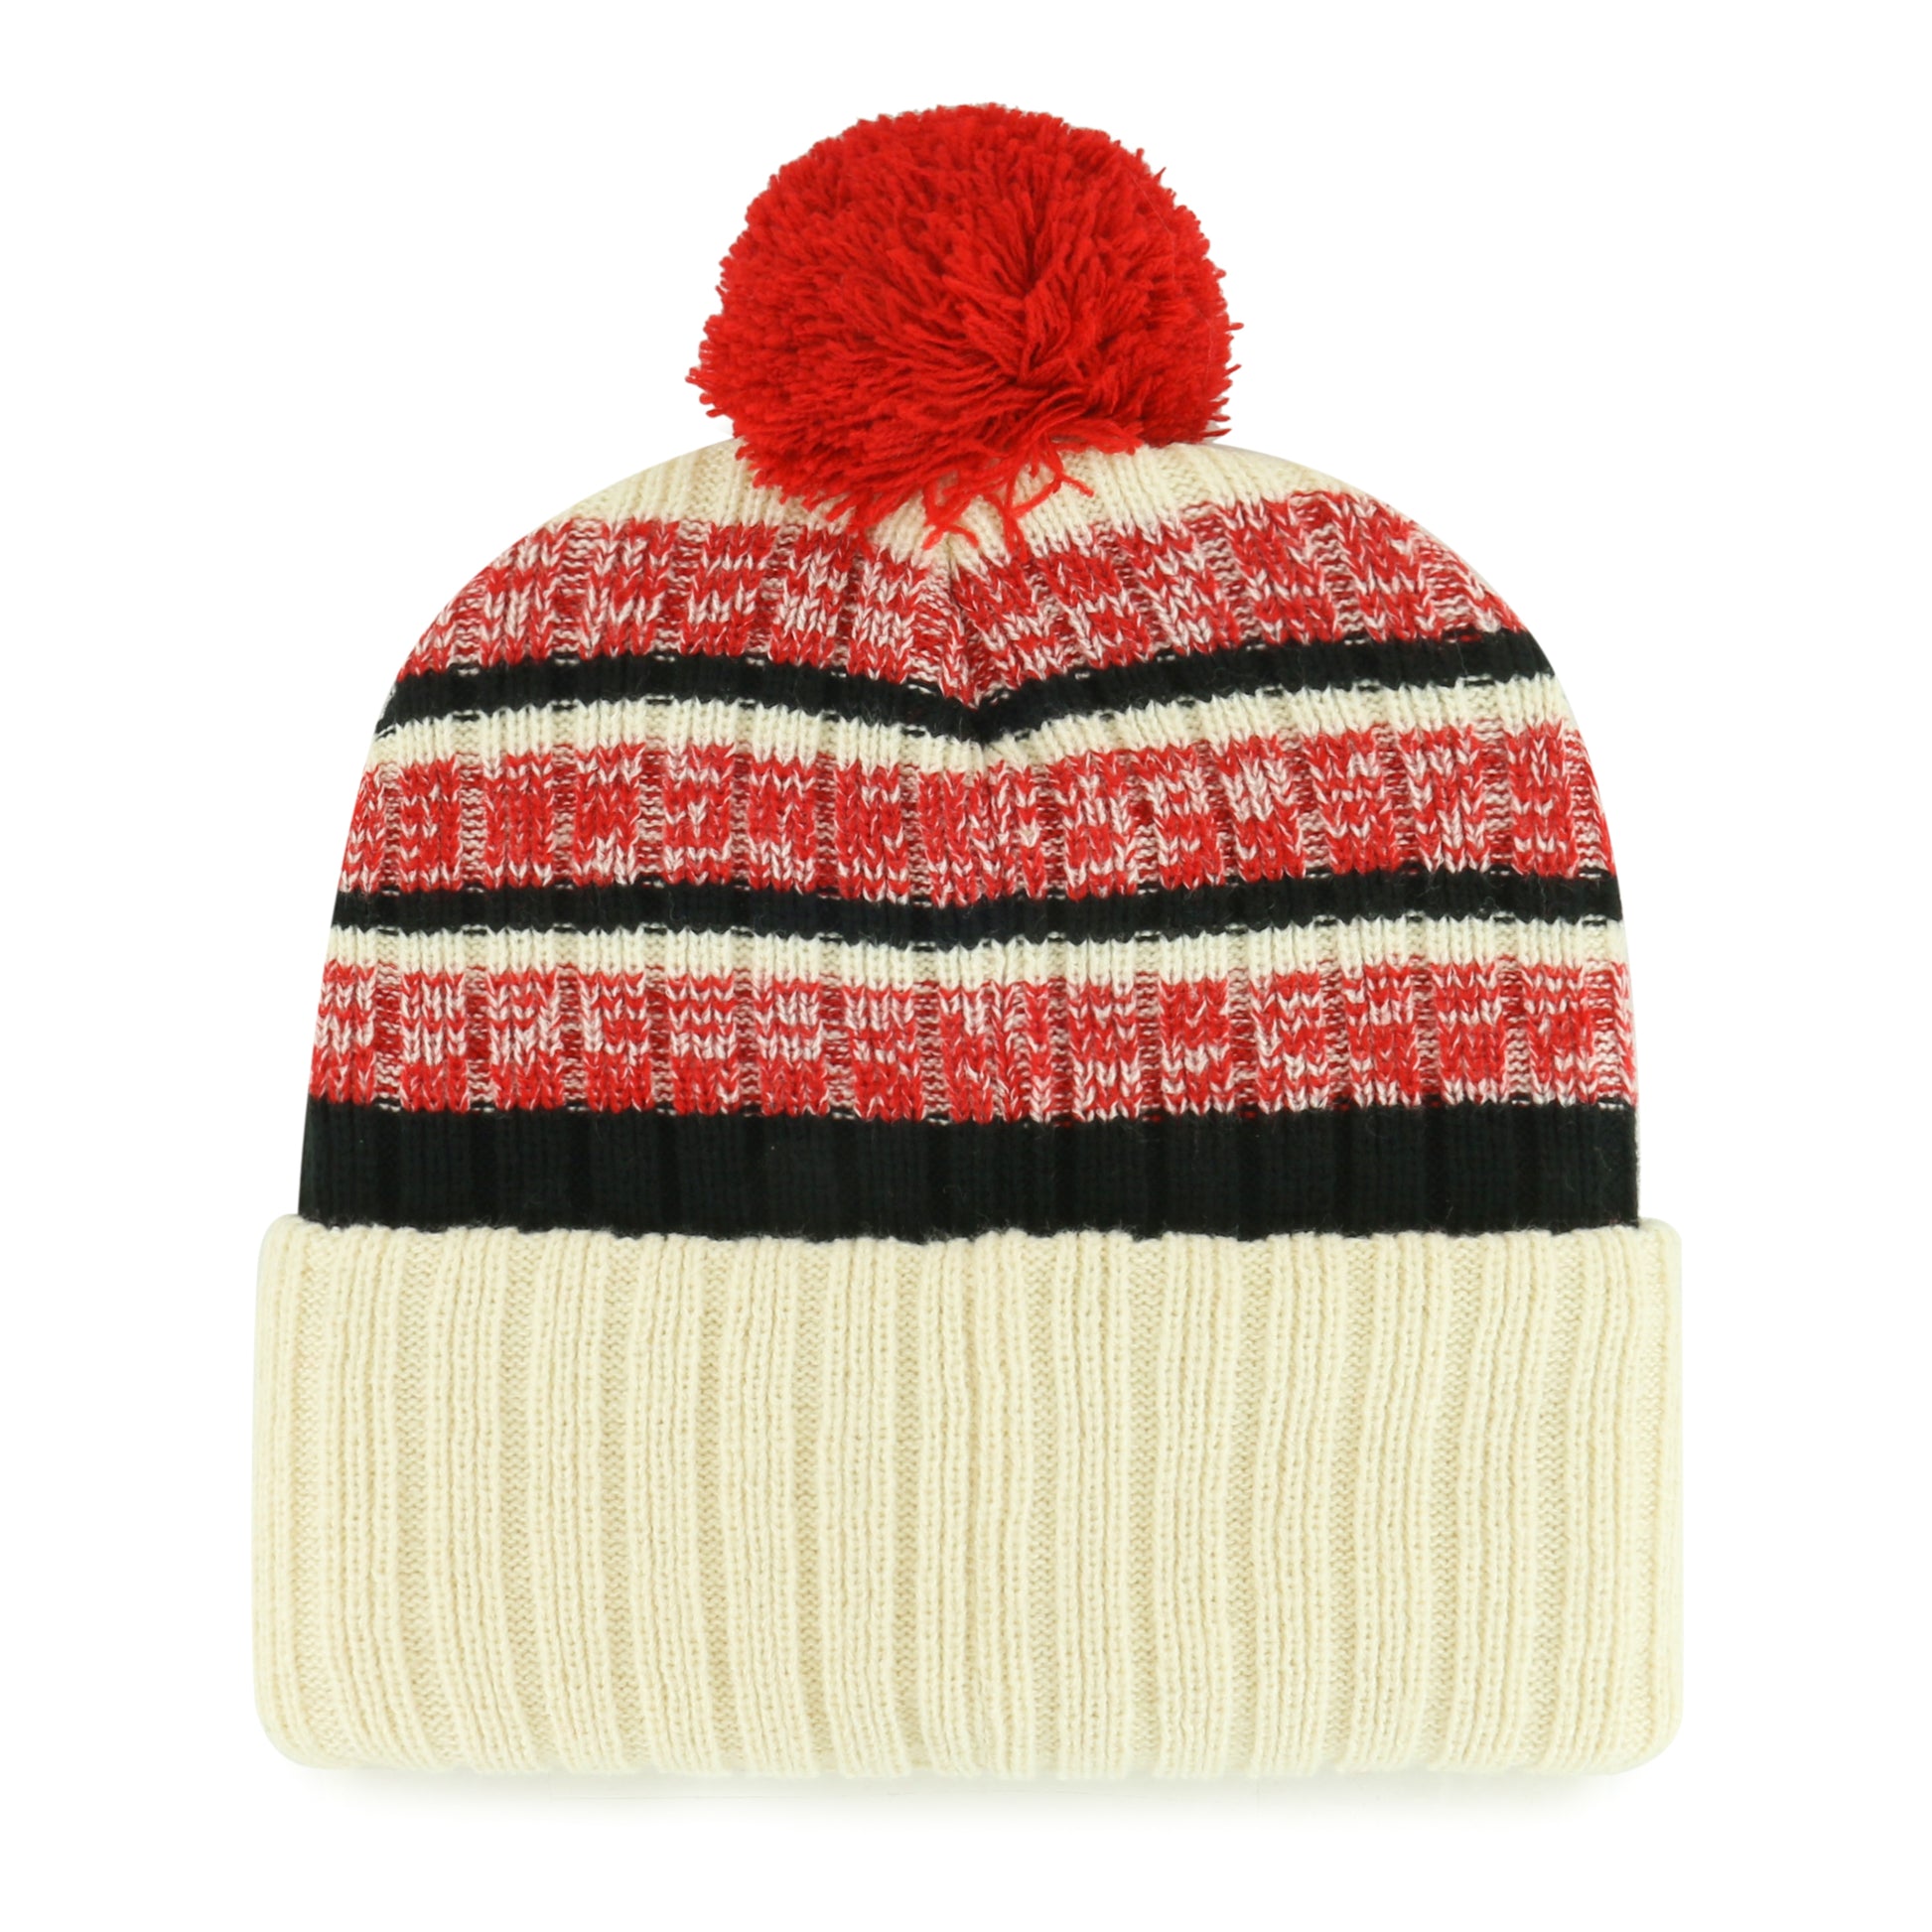 Back: Cream black and red cuffed beanie with red pom